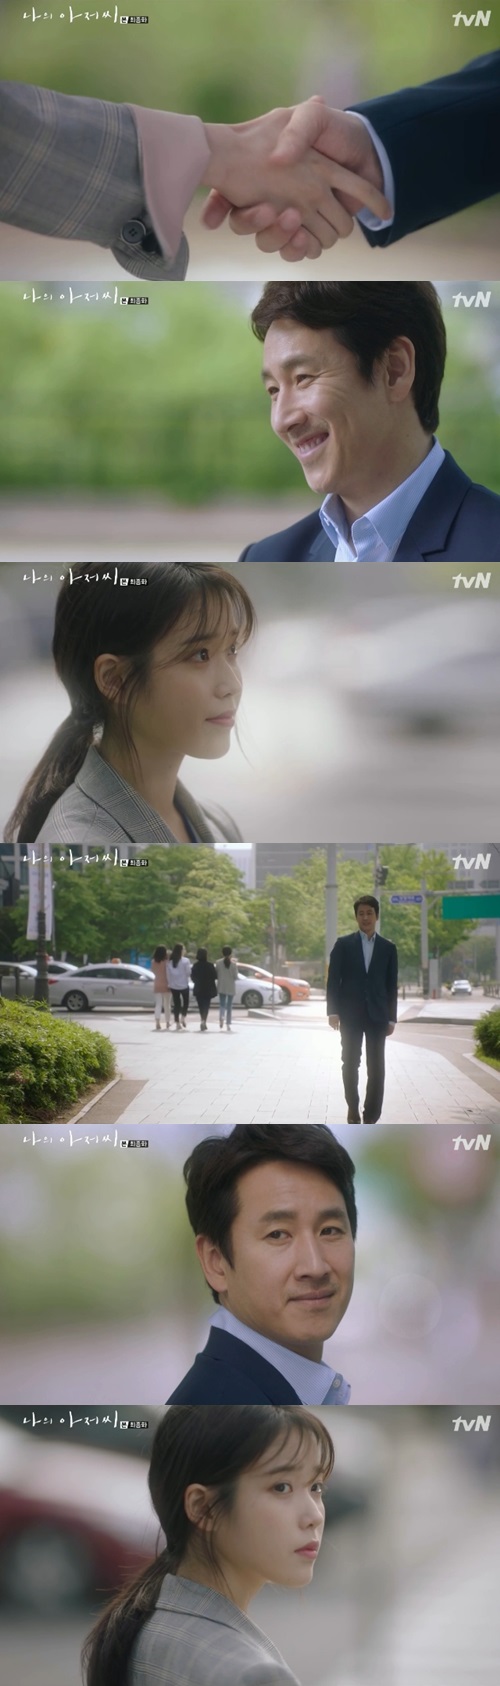 Lee Sun Gyun IU was well received for realistic happy endings that reached comfort like the name Ijian in the play.Park Dong-hoon (Lee Sun Gyun) and Lee Ji-an (IU) reached their comfort in the 16th episode of TVNs tree drama My Uncle, which was broadcast on May 17 (the last episode/playplayplay by Park Hae-young/director Kim Won-seok).Park Dong-hoon knew everything Ijian had done while tapping him and recommended embroidery, and also asked his wife Kang Yoon-hee (Ijia Boone) and Chang (Shin Gu Boone), who were lawyers, for help.Kang Yoon-hee took charge of the Lee Ji-an case himself, and Jang was concerned about the future of Lee Ji-an, taking charge of persuasion of Park Dong-hoon (Jeong Hae-kyun). Park Dong-hoon wrote an application for Lee Ji-ans punishment.Do Joon-young (Kim Young-min) drove everything as if Lee Ji-an had set up the news that the wiretap file had disappeared.In the meantime, Ijian Jomo Lee Bong-ae (Son Sook-min) died in a nursing home, and Ijian called Park Dong-hoon.Park Dong-hoon Park Dong-hoon (Park Ho-san), Park Ki-hoon (Song Dawn), and Jeong Hee (Onara) visited Lee Bong-ae.Park Dong-hoon, who was always worried about his mothers The Funeral, spent the money he had collected.Park ordered wreaths as a list of early football clubs, and called all early soccer clubs. Lee Bong-ae The Funeral, who was in a hurry, became louder, and Ijian stopped tears.Park Dong-hoon also recognized the charnel house himself.Park Dong-hoon thanked Lee Ji-an more for saying, I sent a big Haru. Park Dong-hoon said, I have the Funeral of others.Do Joon-young was desperate to find the eavesdropping file, and Lee Kwang-il (played by Jang Ki-yong) sent the eavesdropping file to Park Dong-hoon in quick, unlike Jong-soo (played by Hong In-young) who was sending the eavesdropping file to Do Joon-young and trying to collect money.Lee Kwang-il decided to help Ijian, and the wiretap file revealed all the truth, and Do Joon-young left the company, but Park Dong-hoon also spread rumors of his wifes affair.Ijian asked Park Dong-hoon, Can I hold it once? Before leaving, saying, I want to start a new job in Busan with the help of Chang.Park Dong-hoon hugged Todaktodak Ijian; time passed, and Park Dong-hoon became a representative by leaving the company and starting a business.Lee Ji-an came to Seouls head office from Busan and was living as an ordinary office worker.Ijian accidentally heard Park Dong-hoons voice in the cafe and found Park Dong-hoon; Park Dong-hoon smiled brightly at Ijian.Park Dong-hoon said, I dont know when Im coming. Youre good at your job. I heard from the president. Lets shake hands. Thanks. Igian said, Ill buy some.I want to buy you something delicious. So Park Dong-hoon and Ijian turned around after a short reunion and turned back to each other with a time difference.The two men did not meet again, but Park Dong-hoon asked, Gian, have you reached comfort? Ijian replied with confidence that Yes. Yes.The chance reunion of the two made Happy Endings that left a warm afterglow.Yoo Gyeong-sang